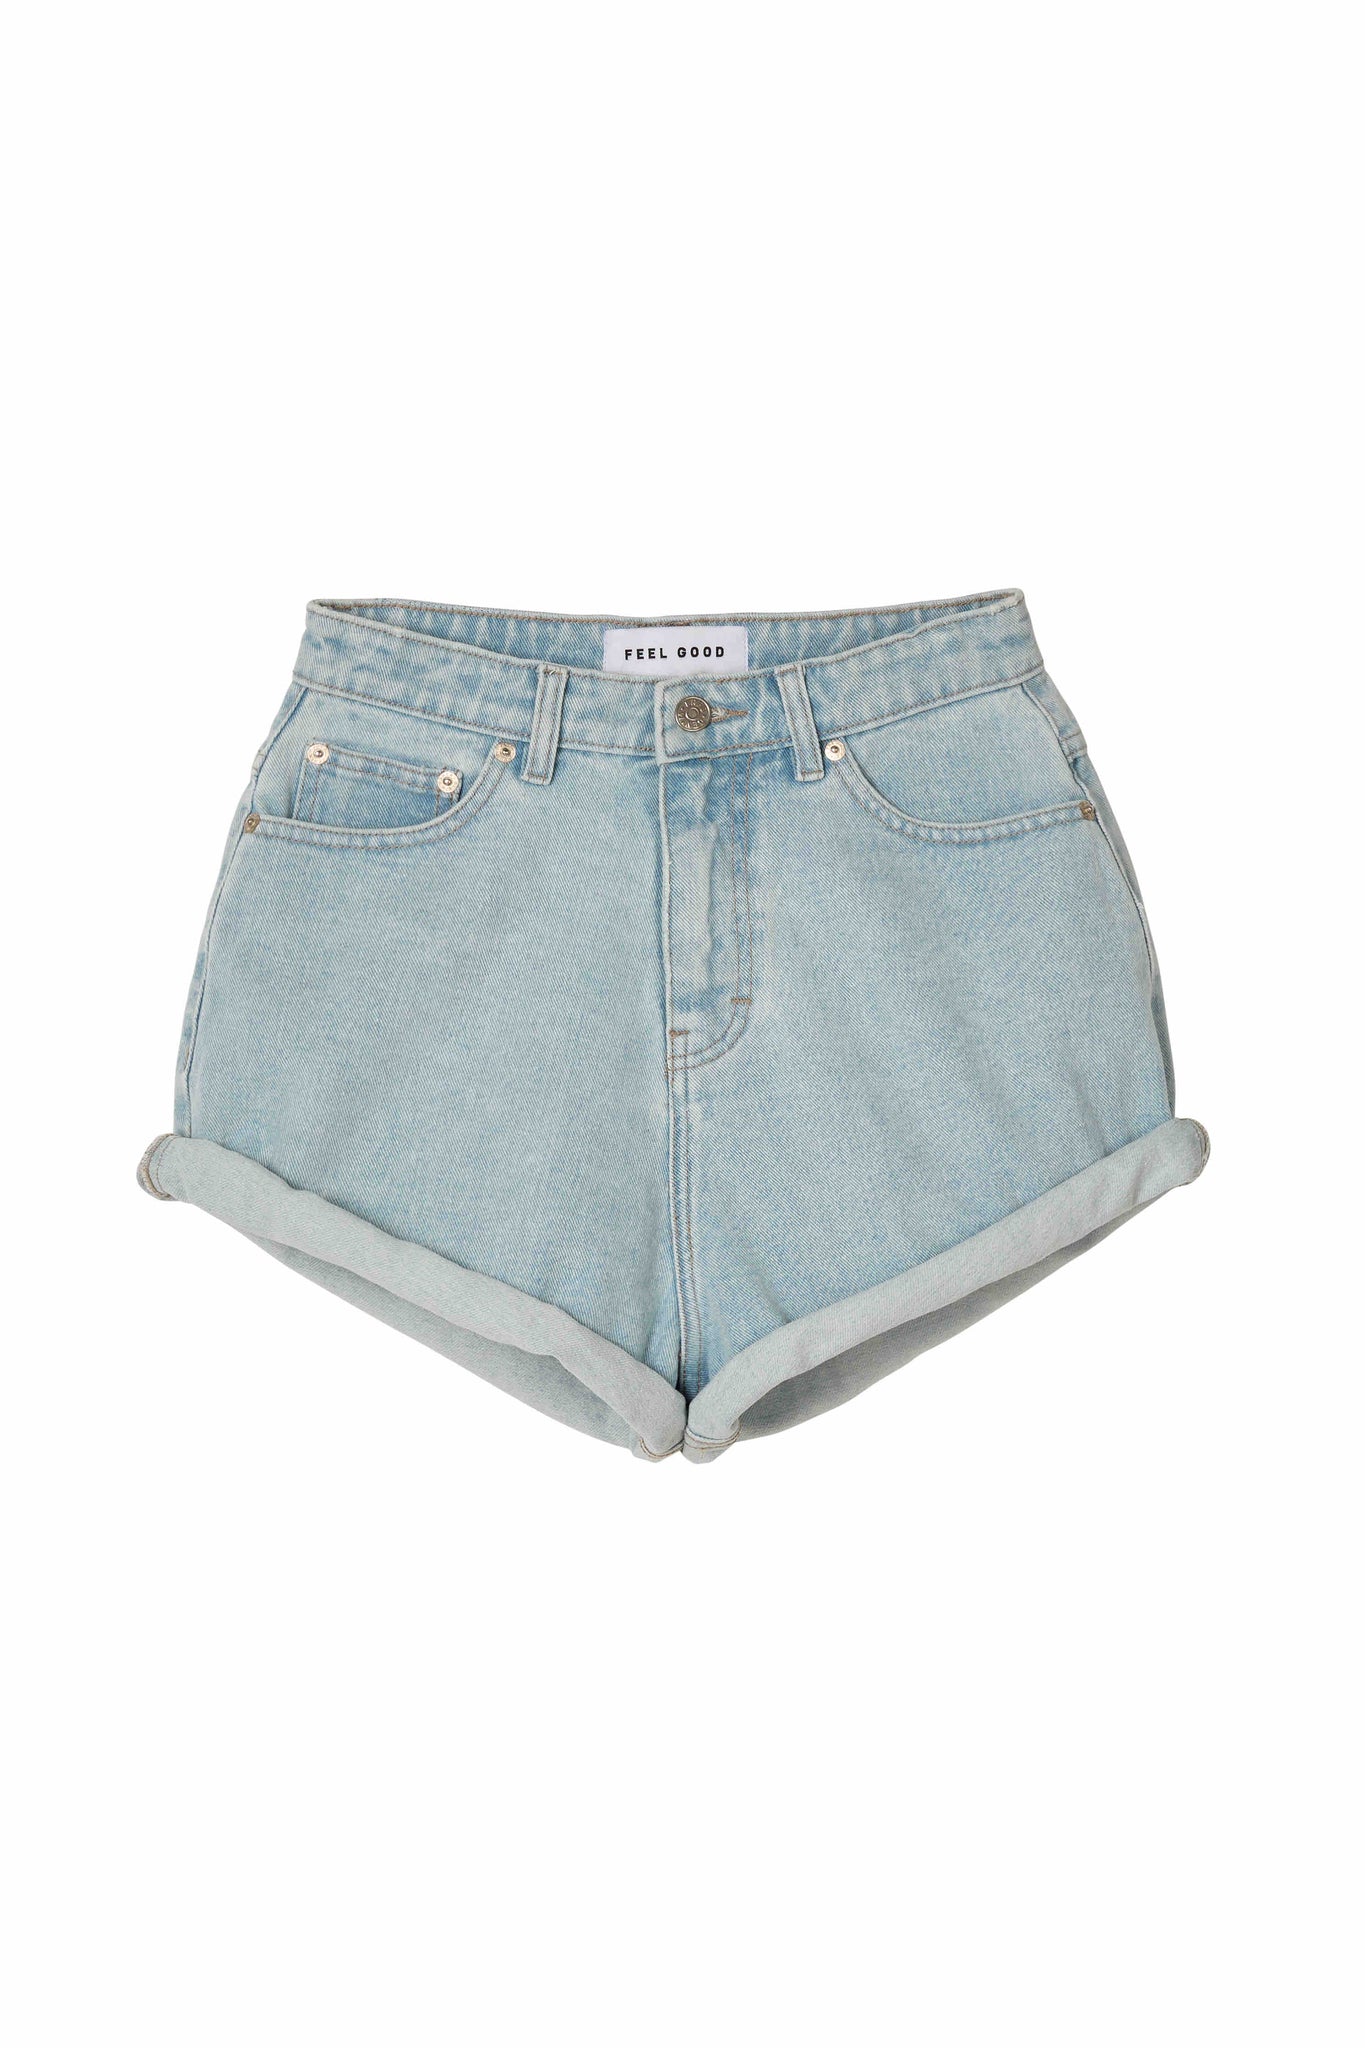 ROLL UP SHORTS in BLUE